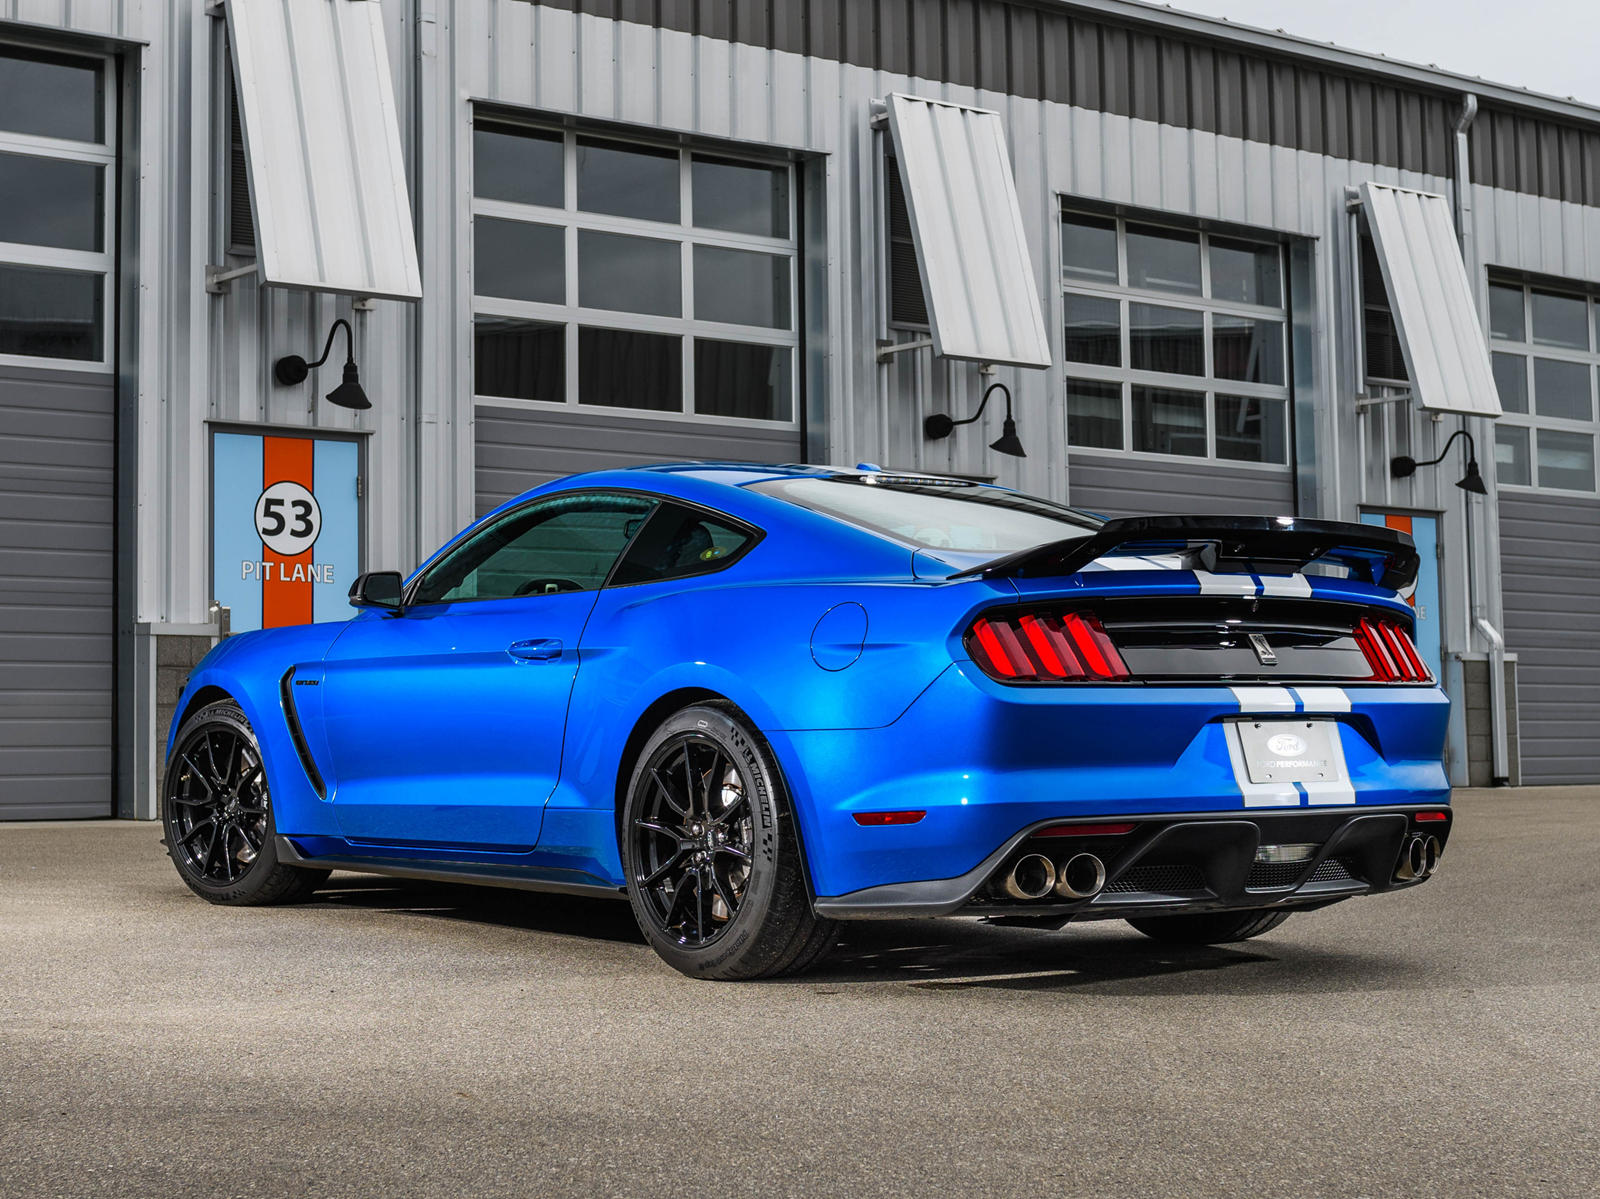 Legendary Detroit Tuner Gives Shelby GT350 Huge Power Bump | CarBuzz